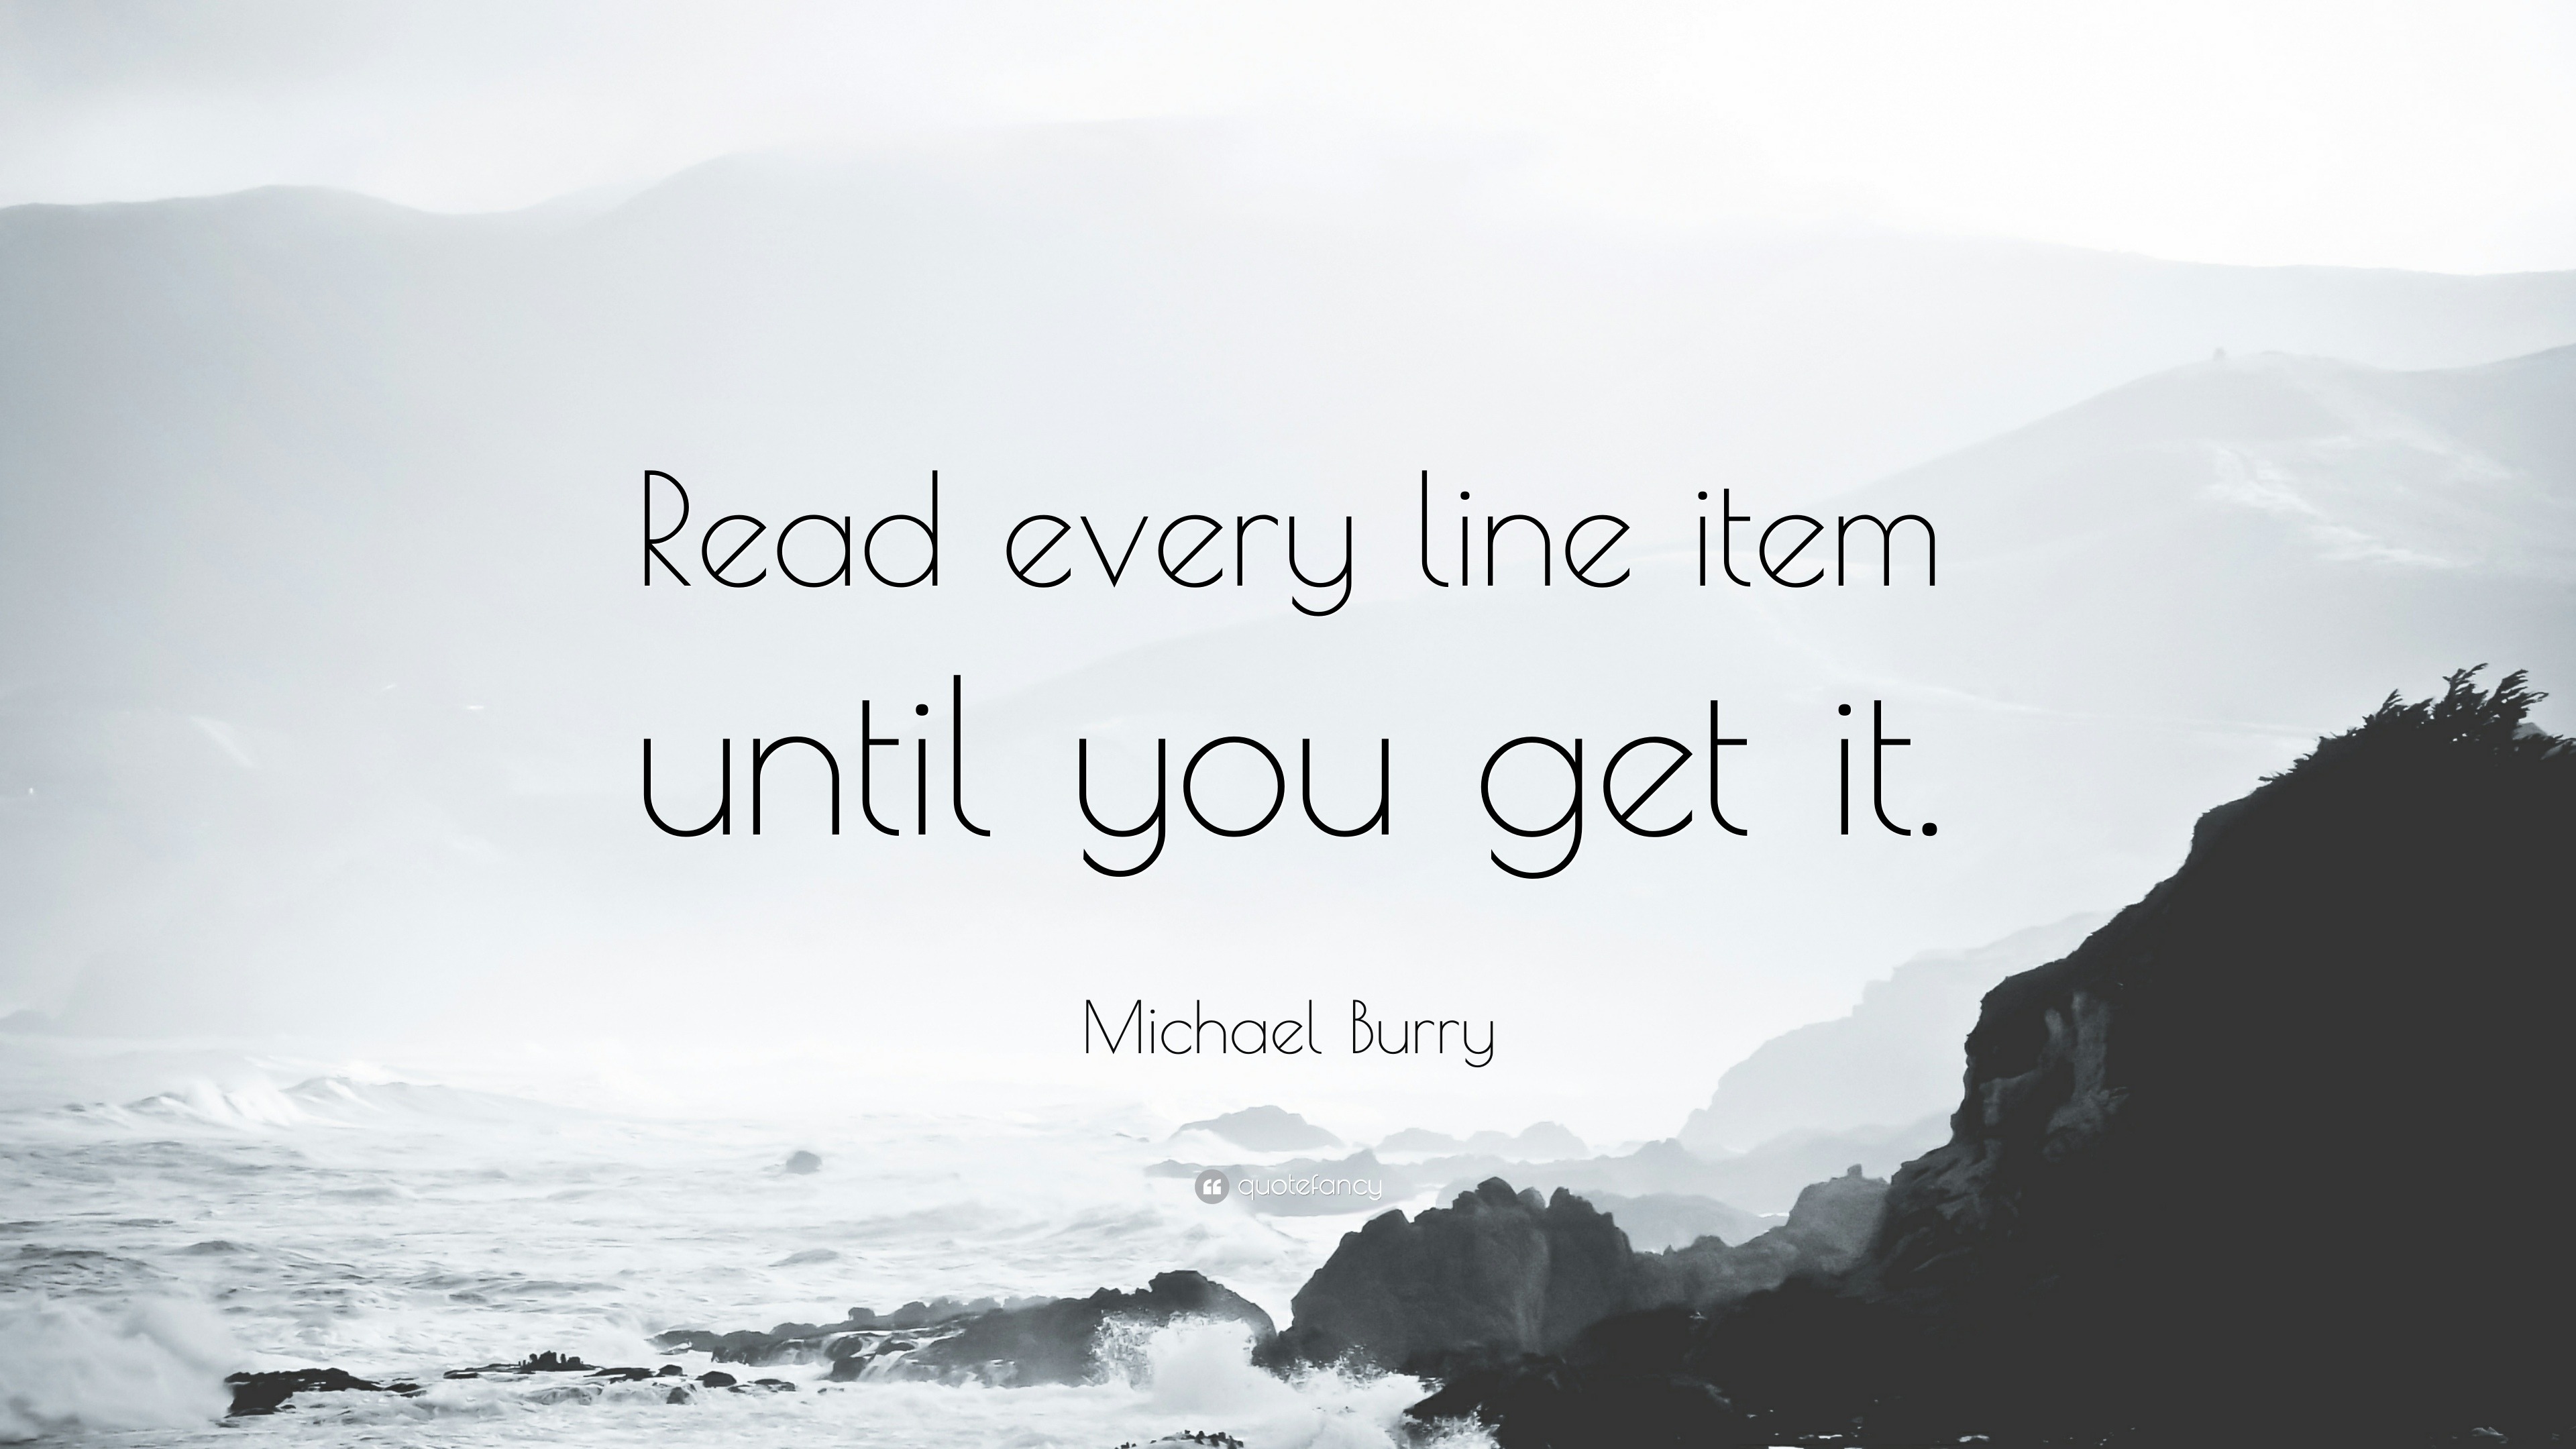 1527897-Michael-Burry-Quote-Read-every-line-item-until-you-get-it.jpg